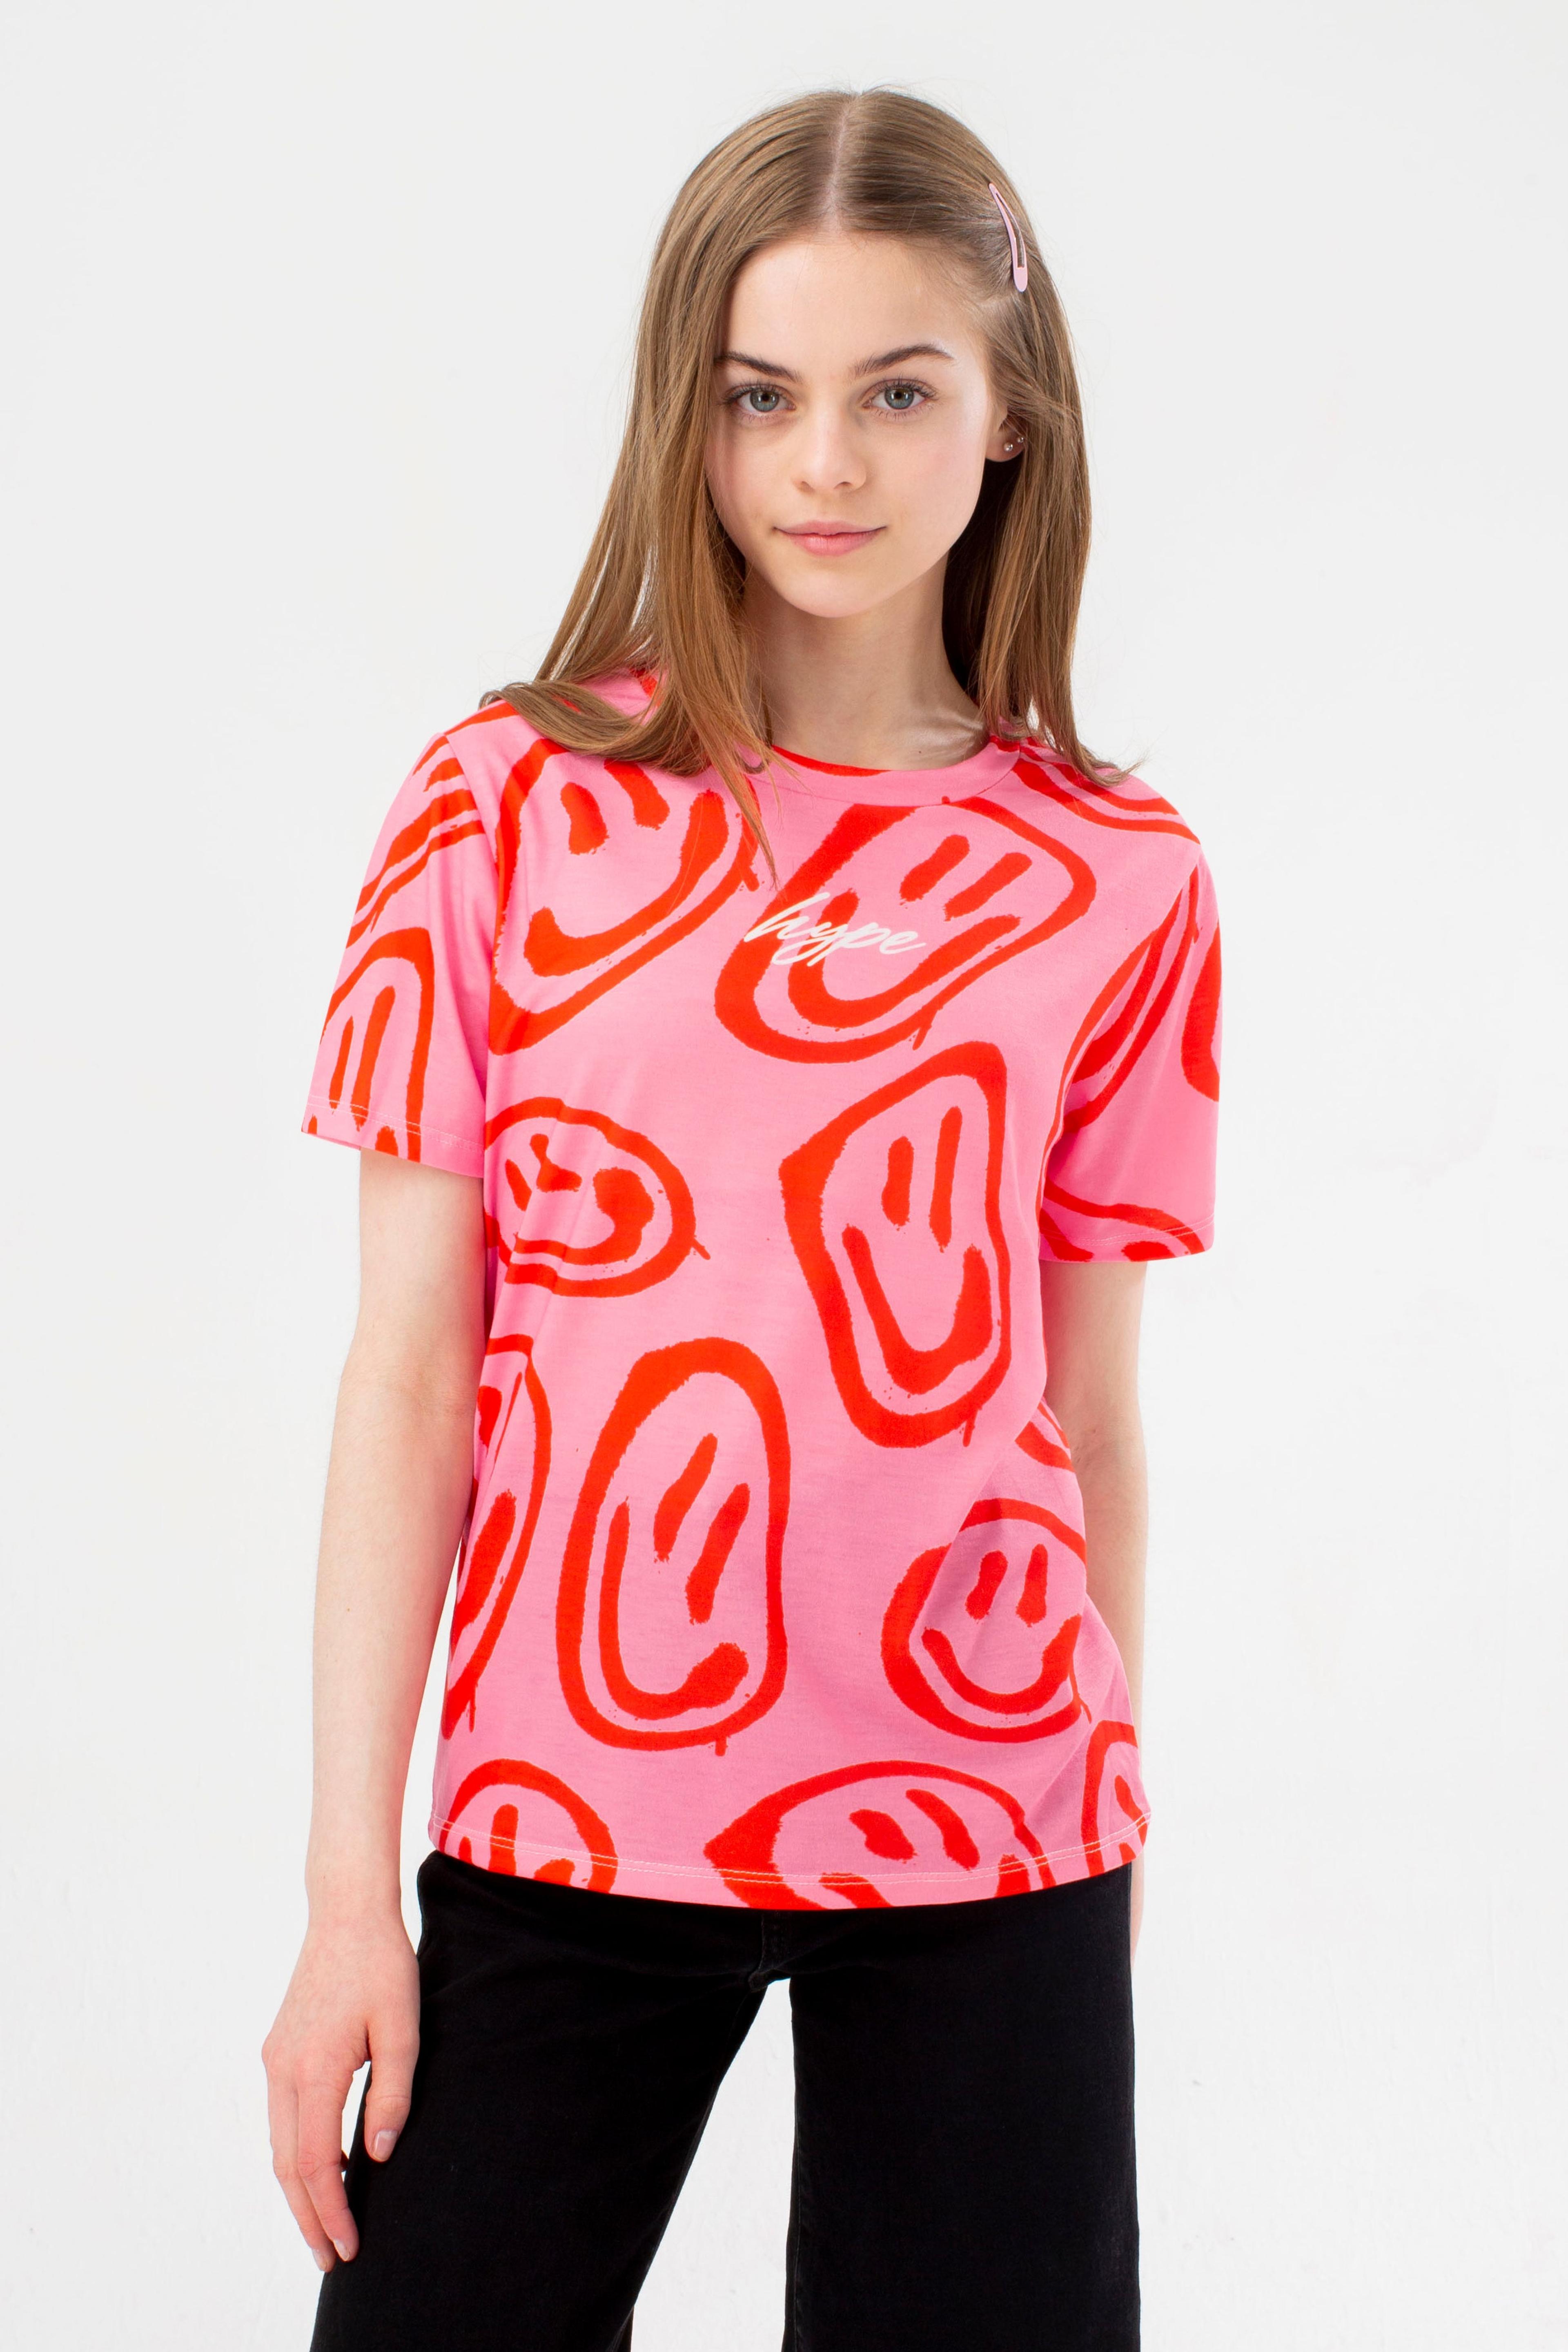 HYPE GIRLS PINK SMILEY WAVE SCRIBBLE T-SHIRT